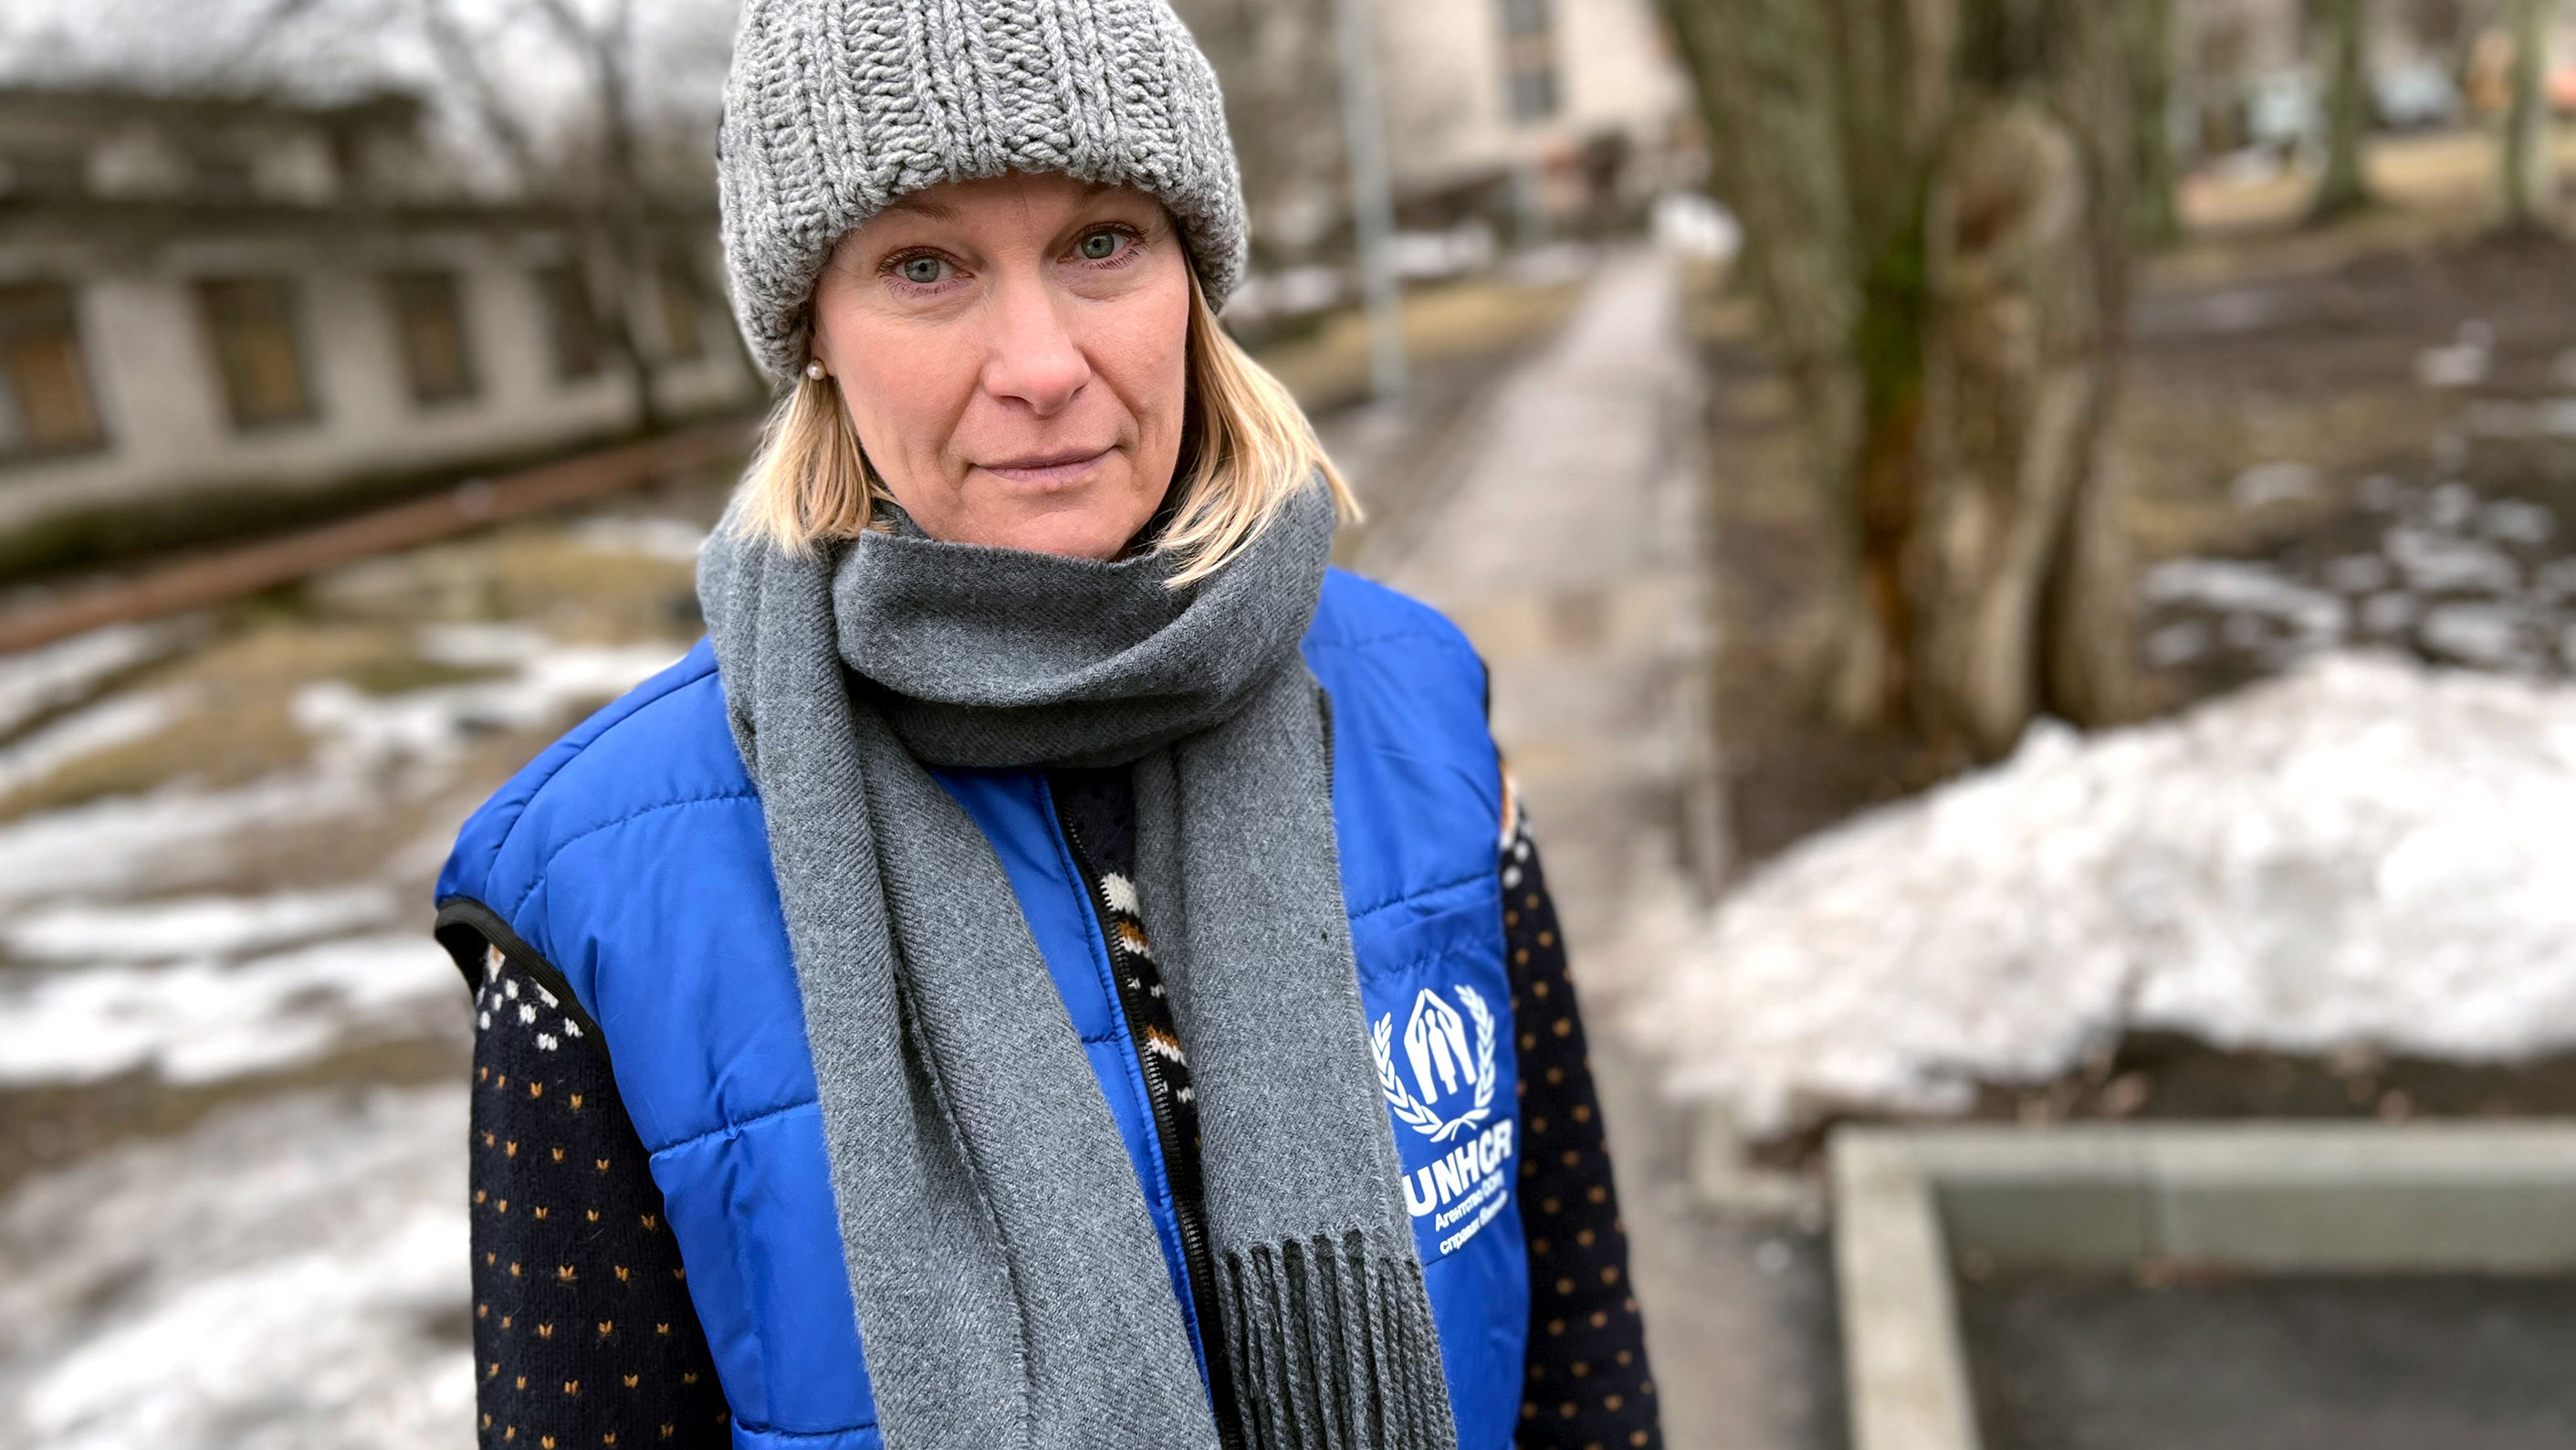 Karolina is pictured in the snowy outdoors wearing a knitted grey hat and UNHCR vest